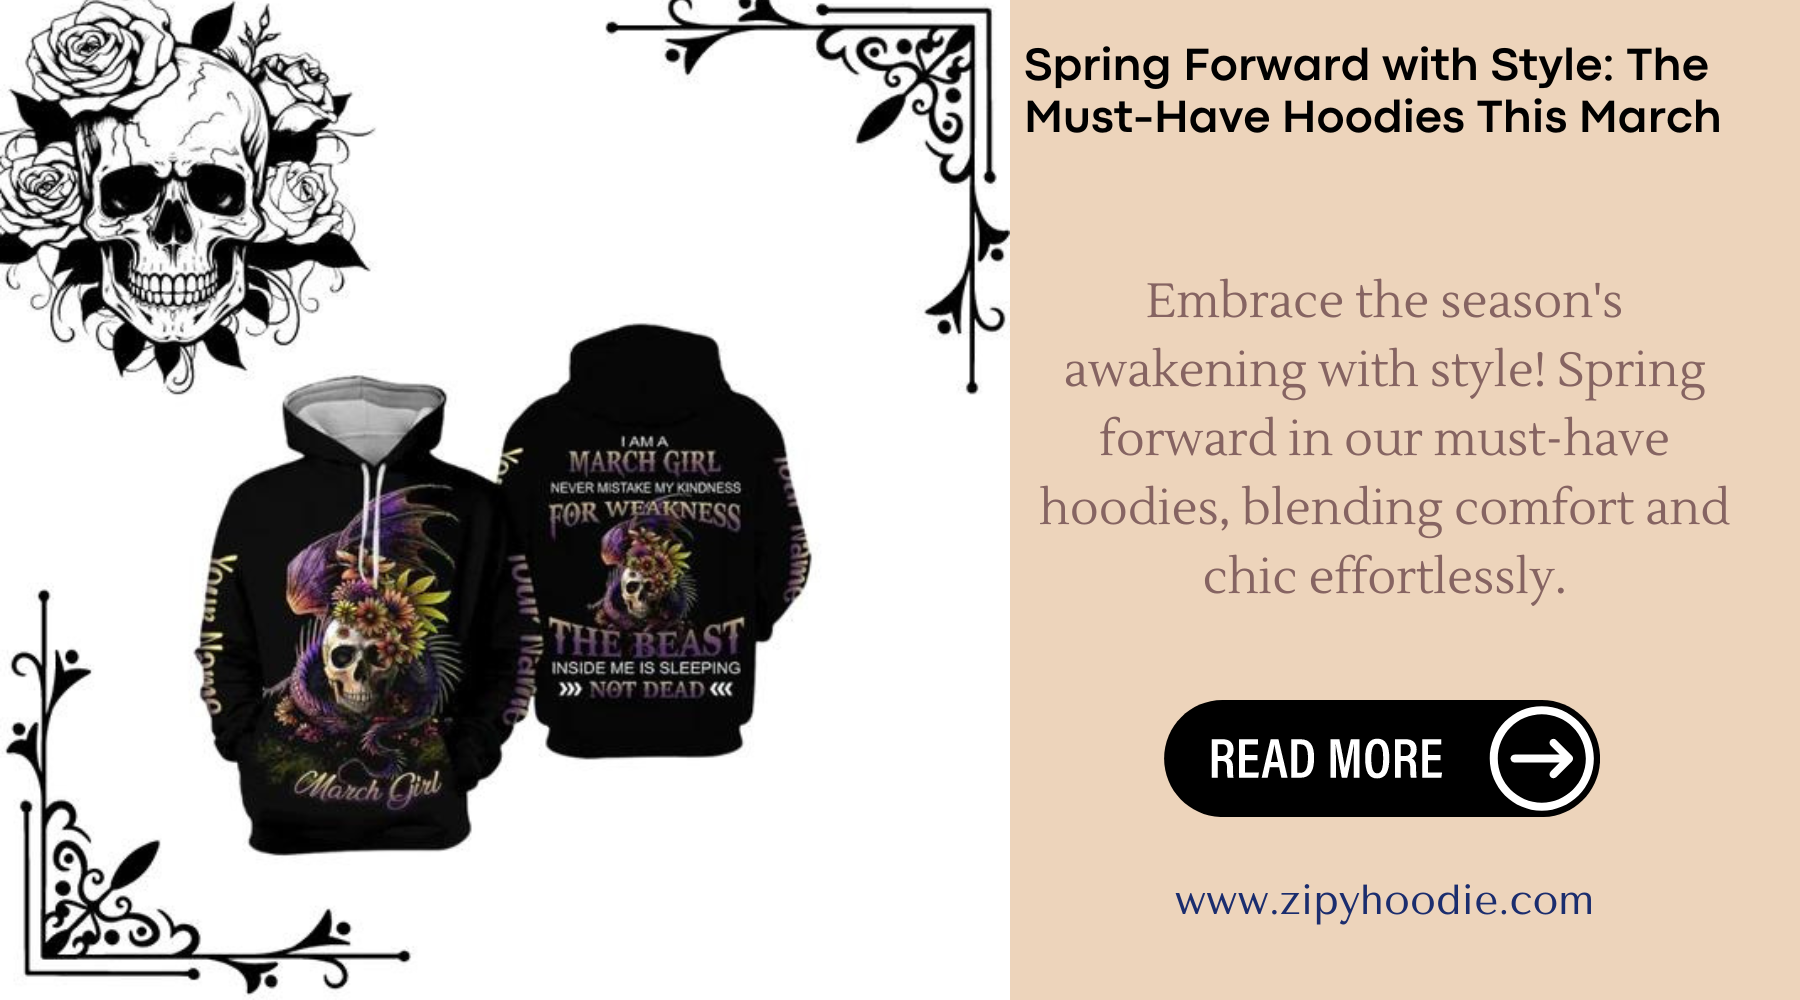 Spring Forward With Style: The Must-Have Hoodies This March